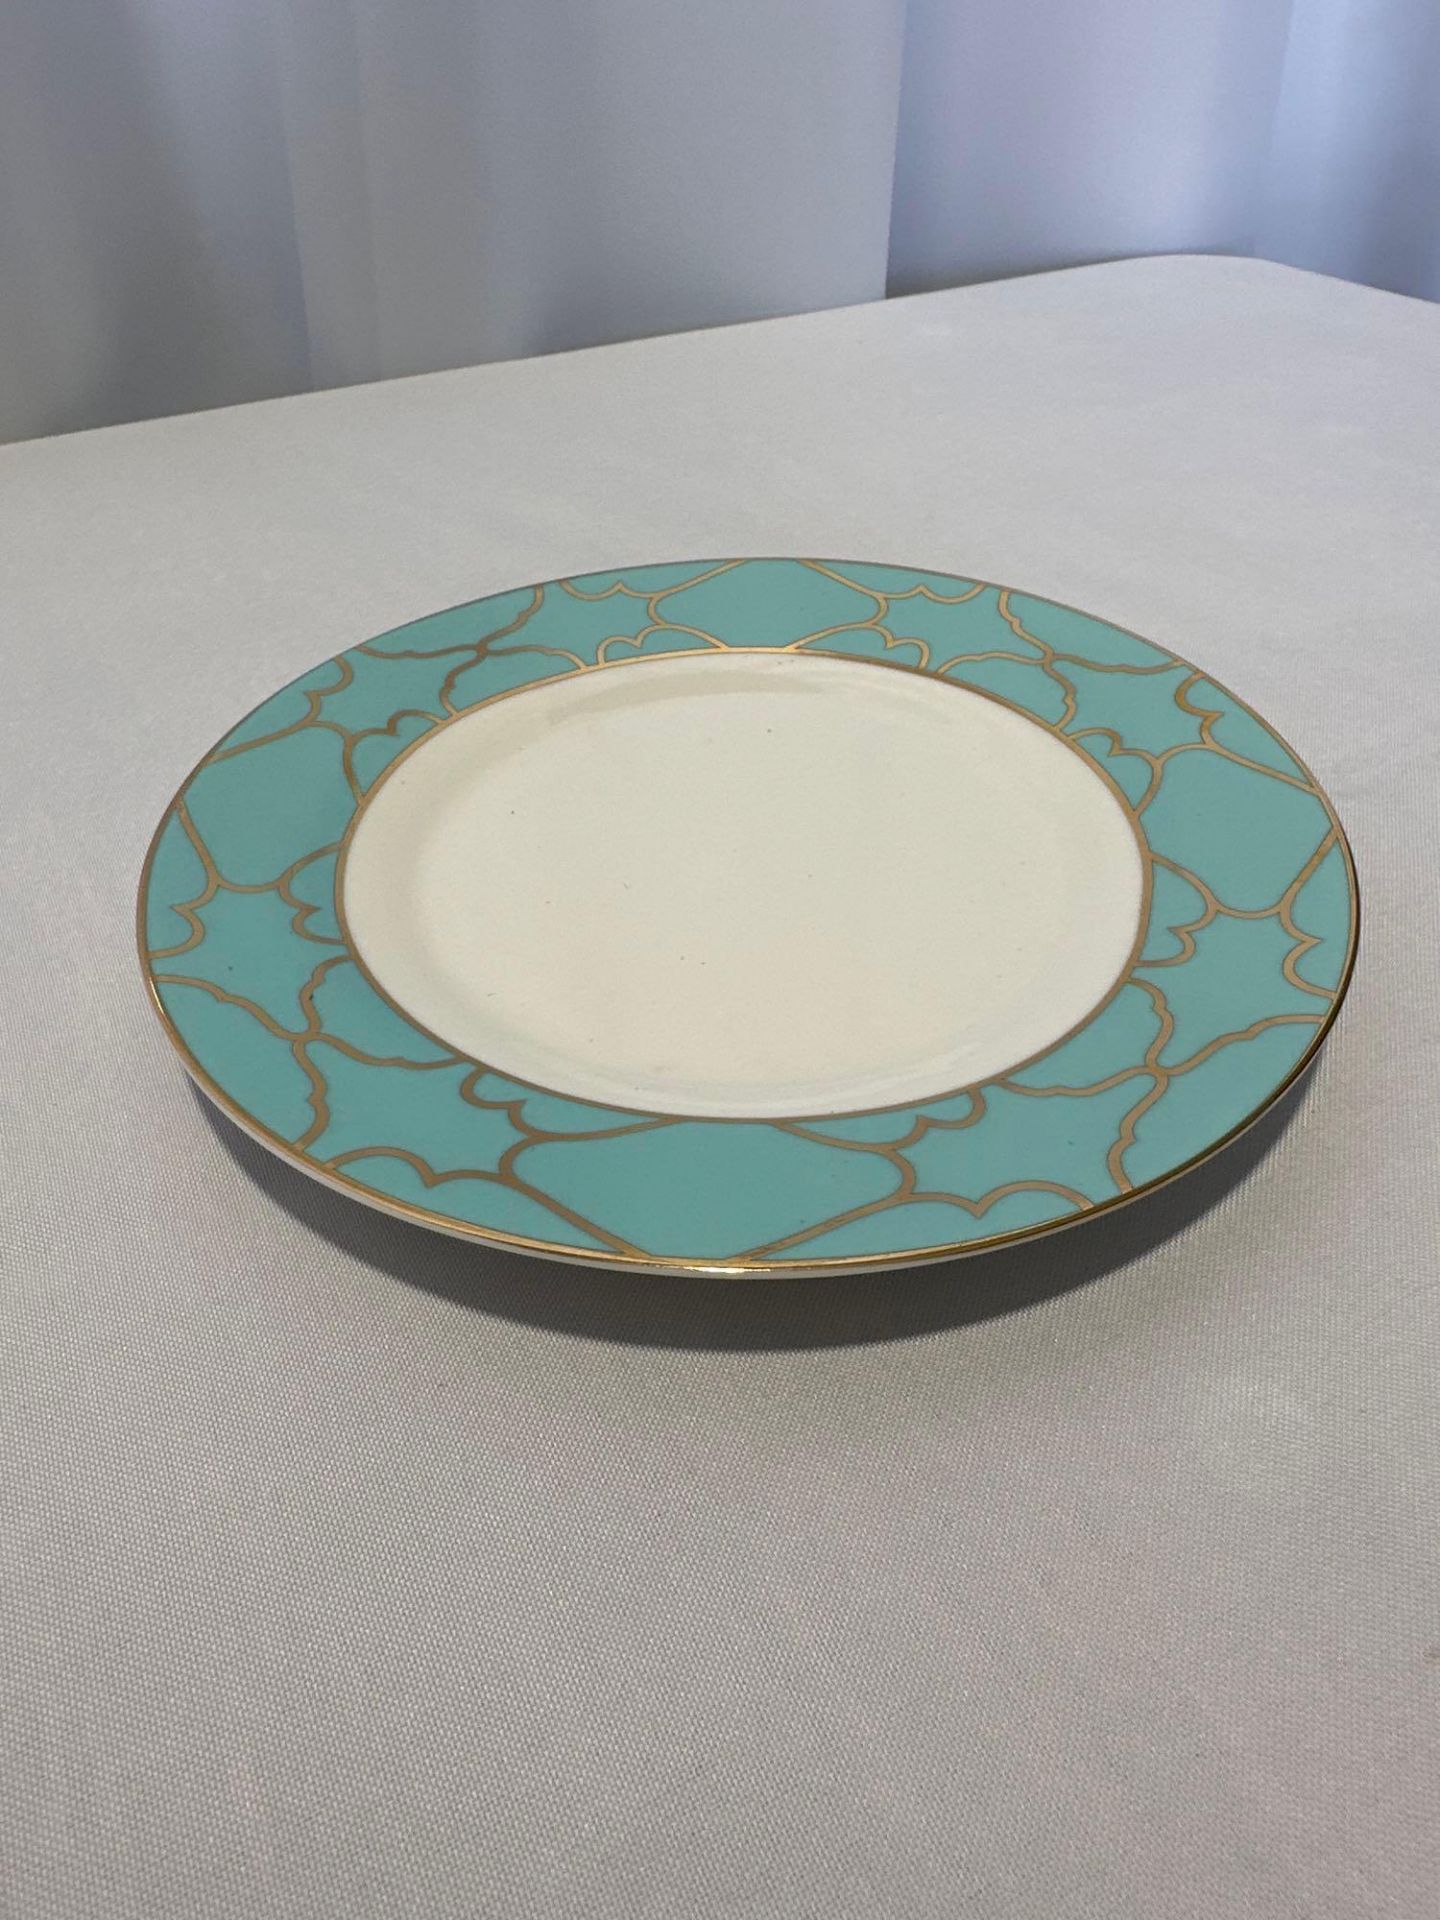 8" Margo Tiffany Blue Plate (NO crate charges) - Image 2 of 3